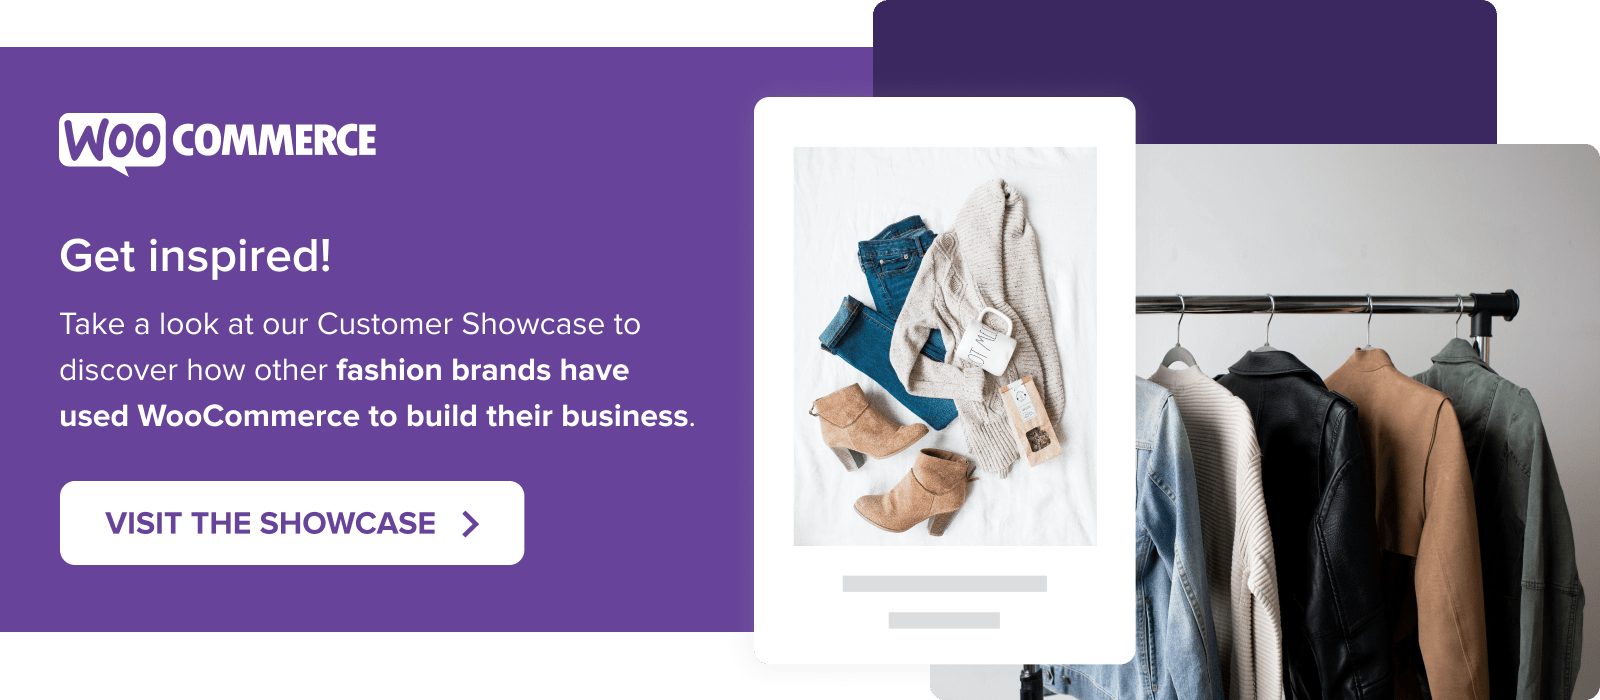 Take a look at how other fashion brands have used WooCommerce to build their business